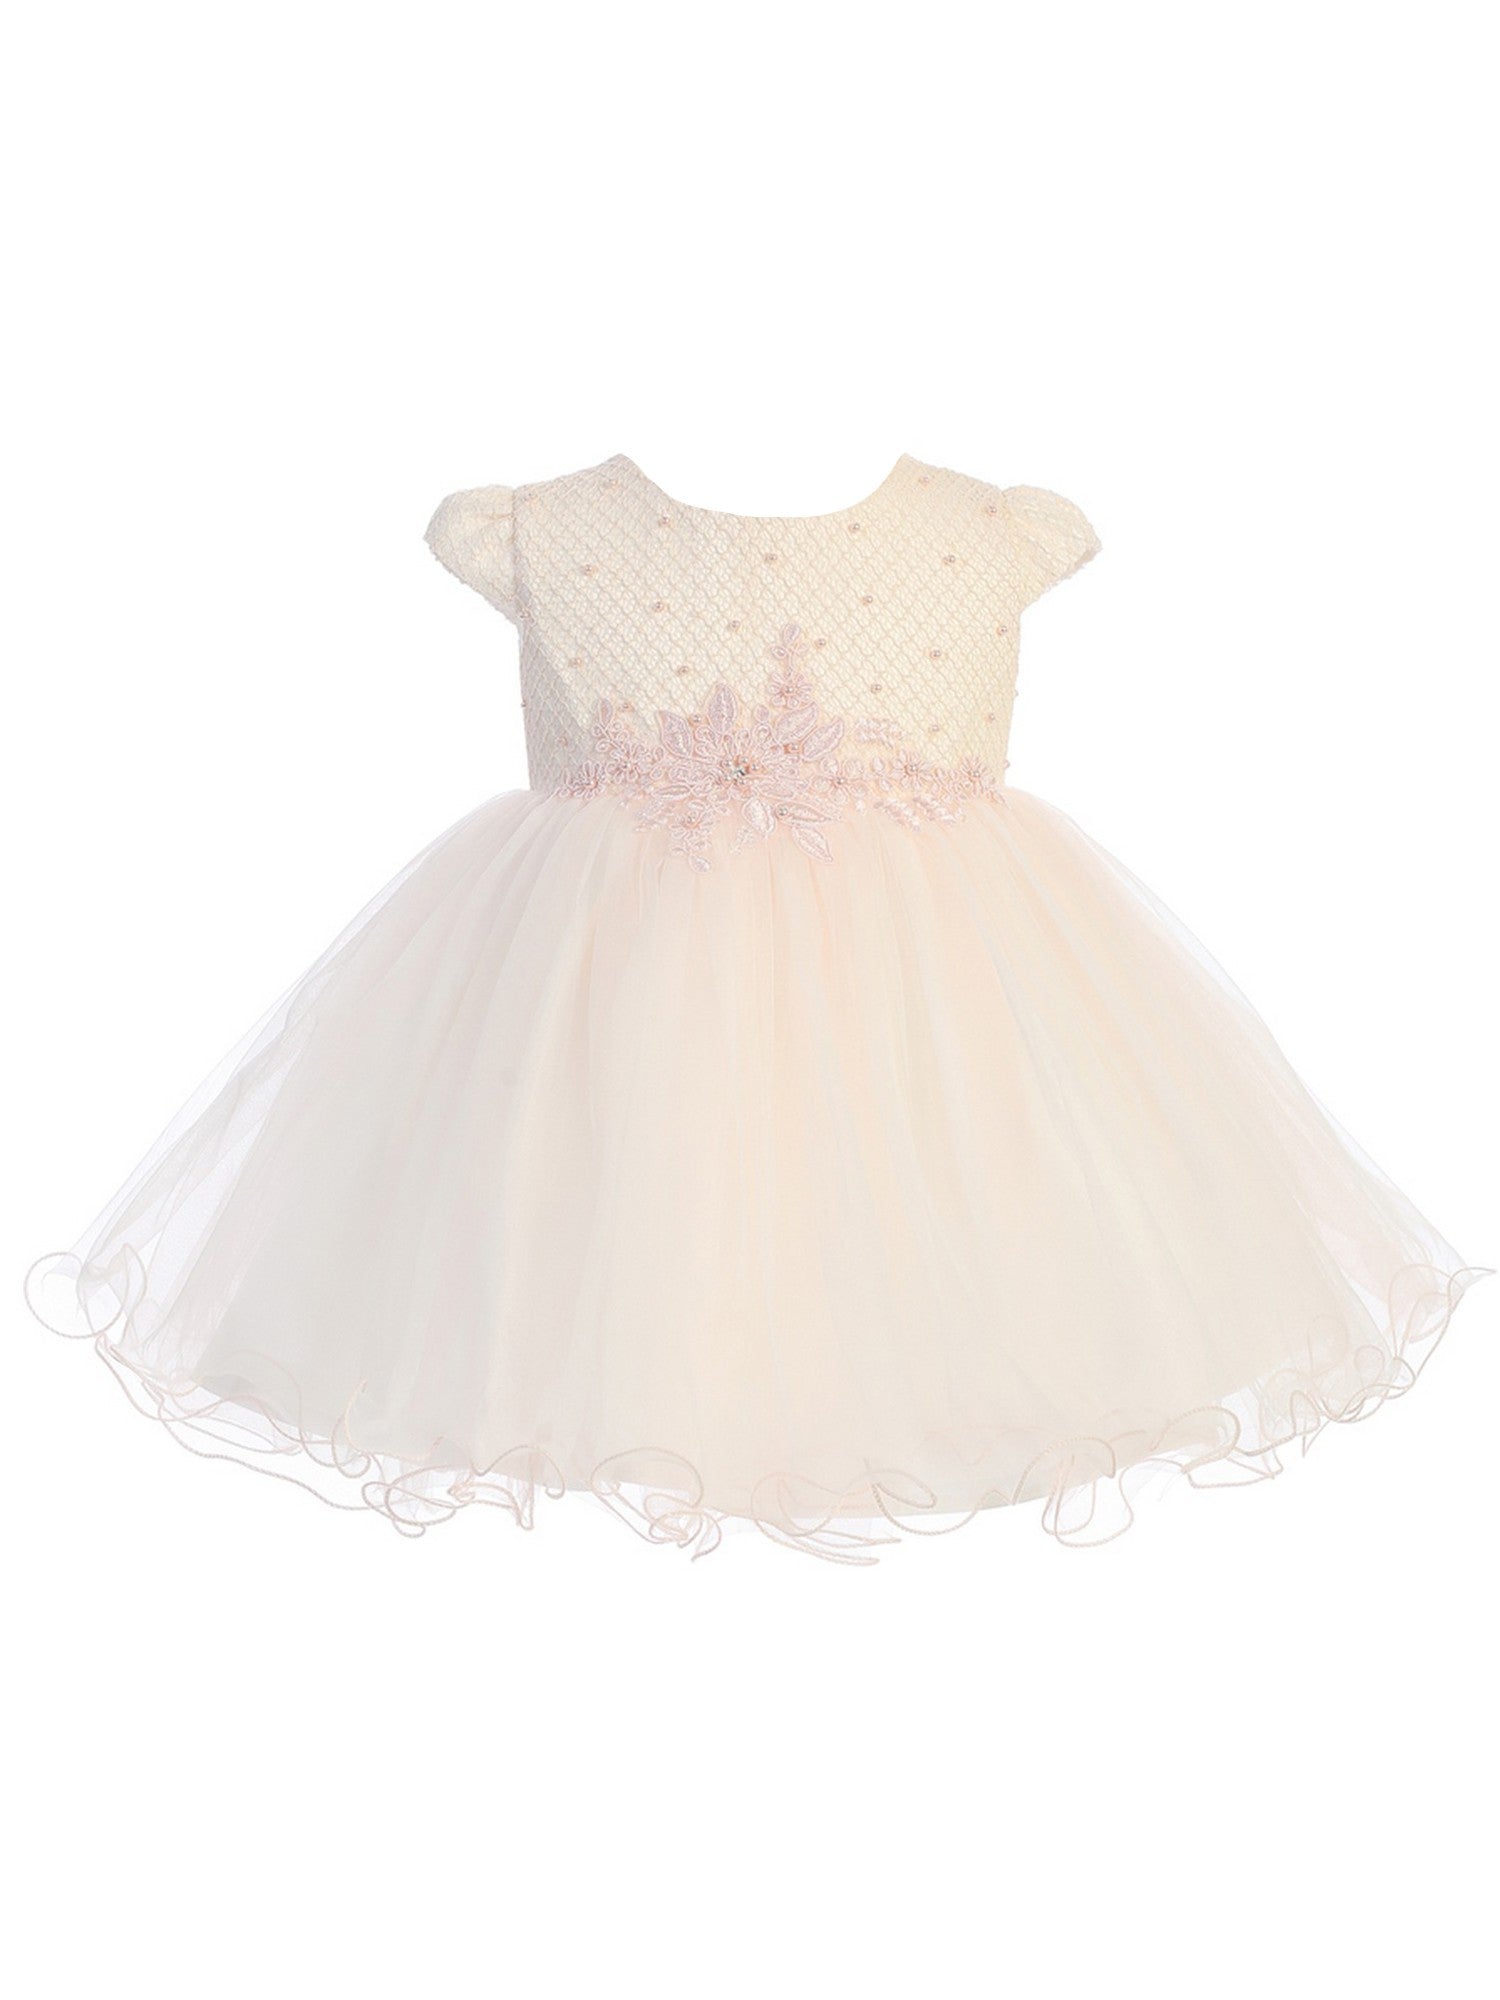 Baby Girls Multi Color Waffle Pattern Pearls Lace Flower Girl Dress 0M-24M